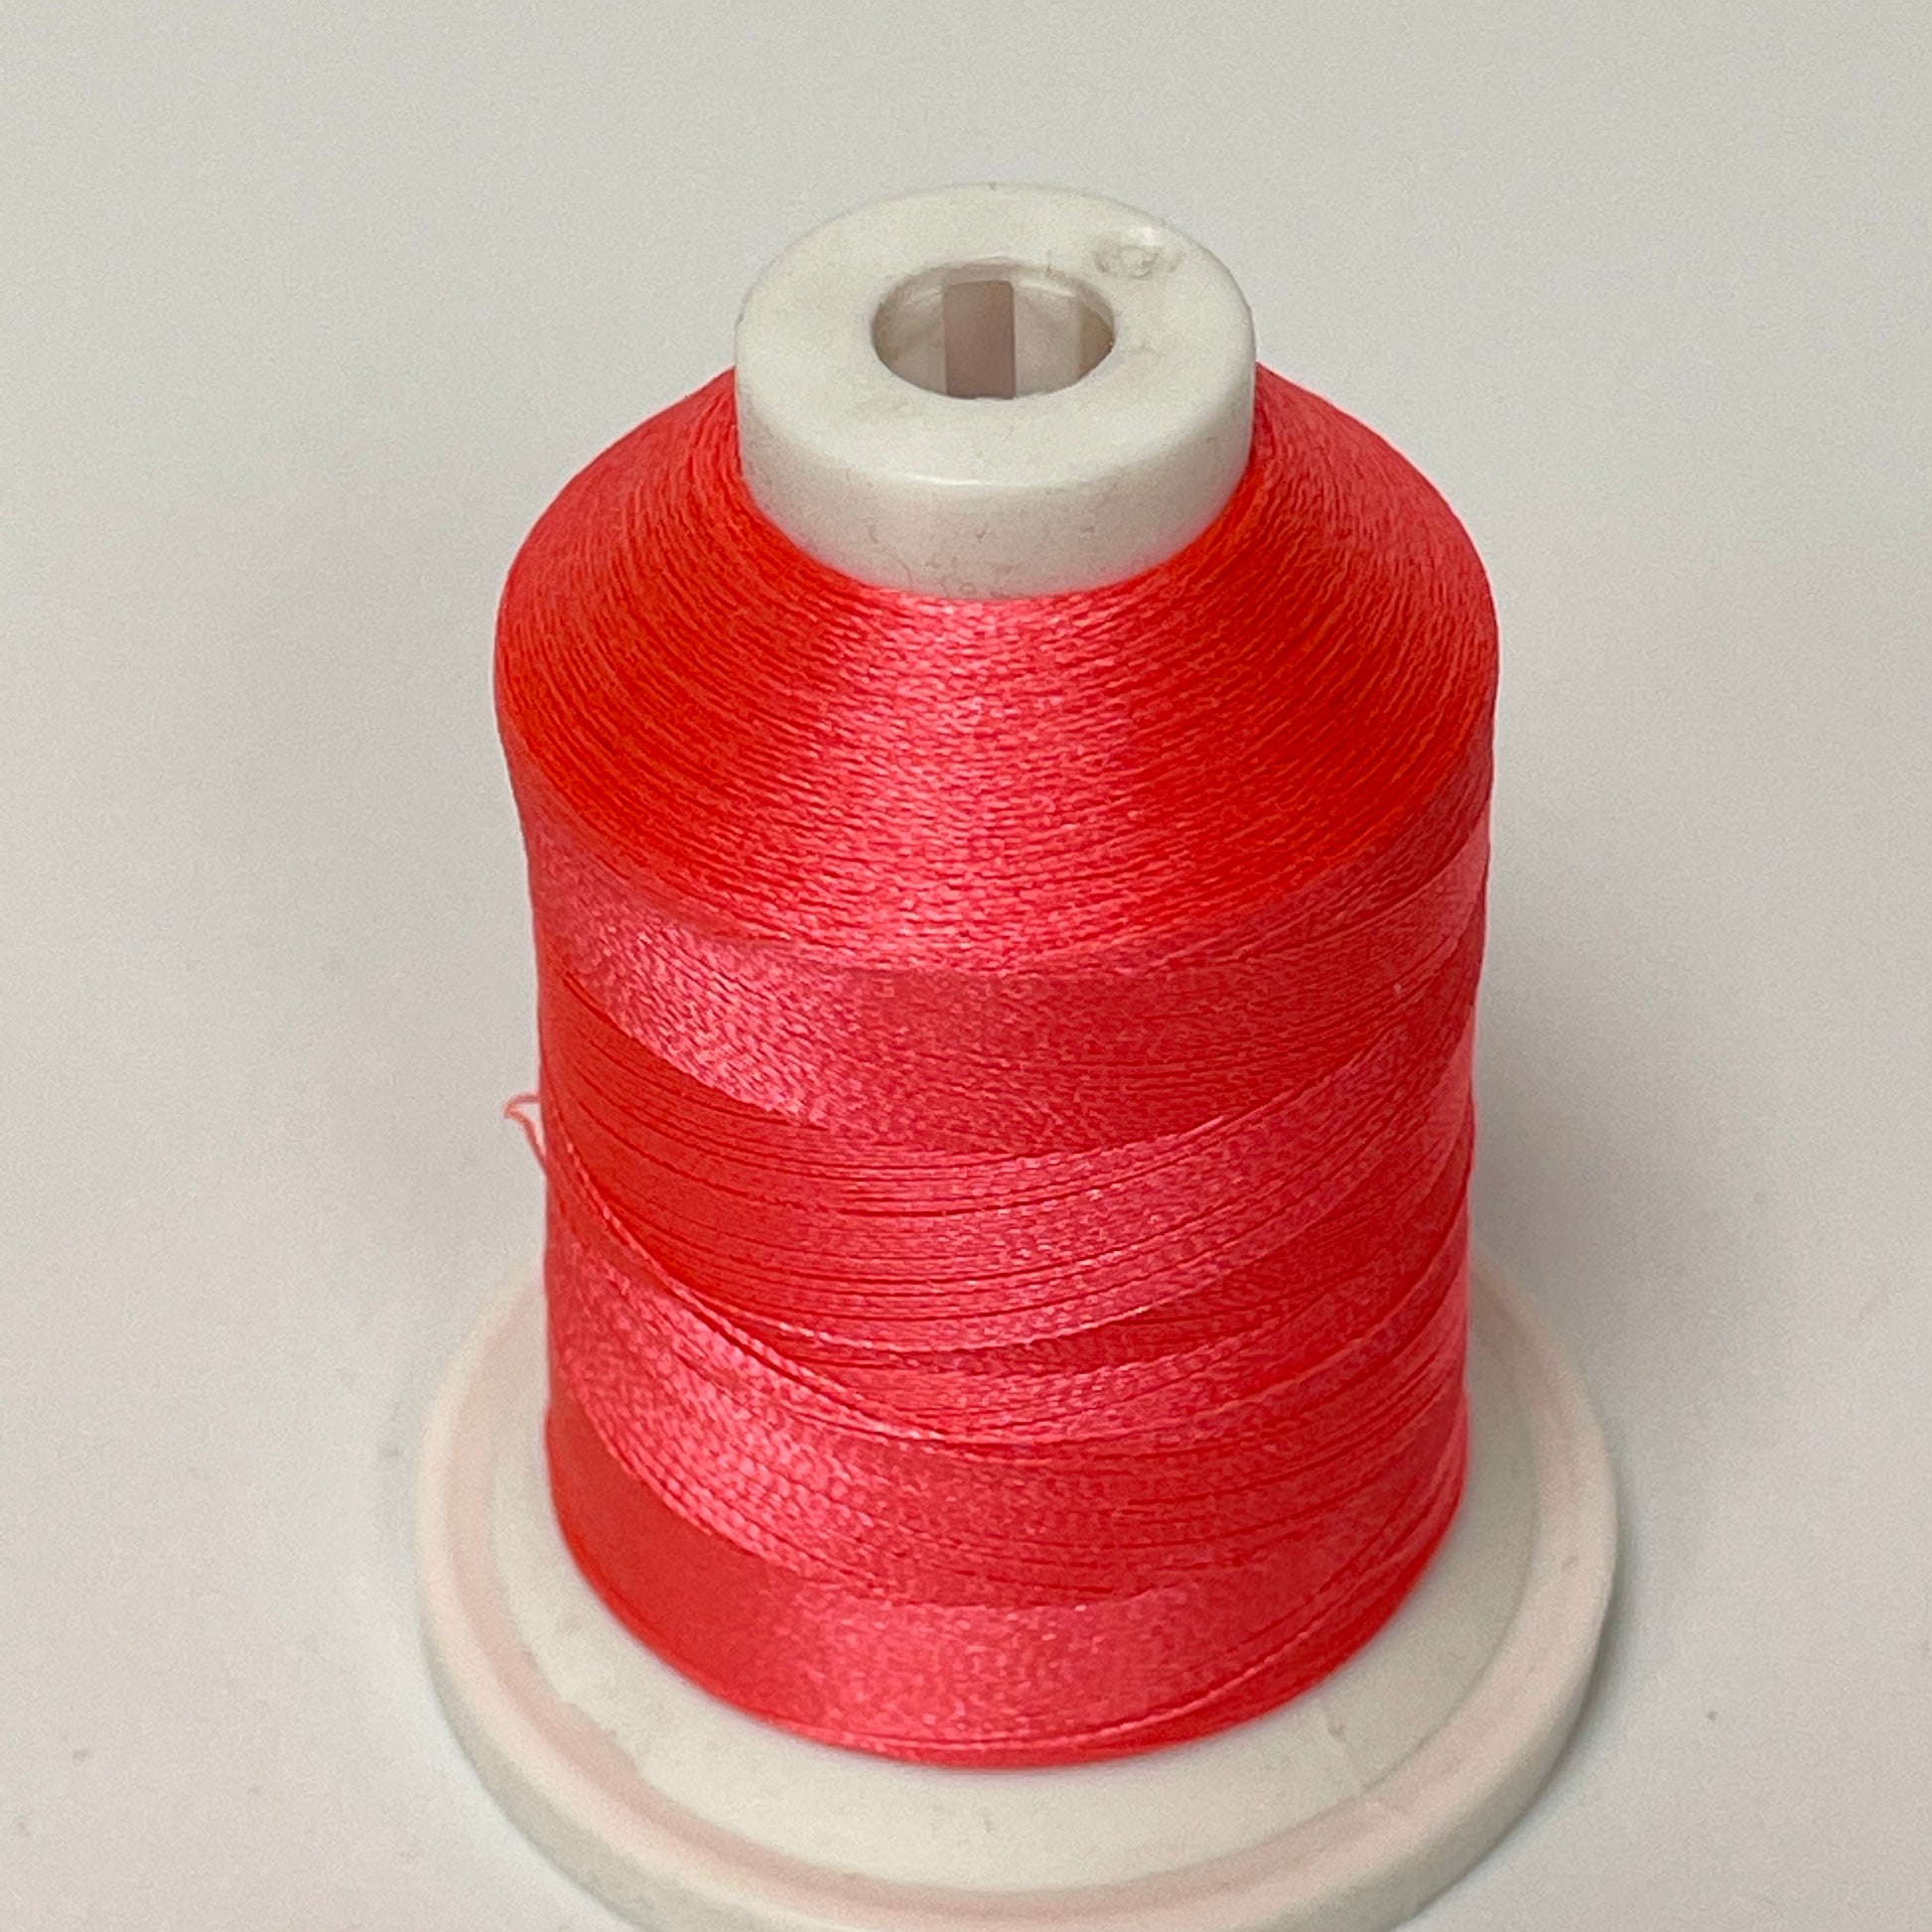 ETP001 Brother PaceSetter Pro Embroidery Thread - 1100 yd Spool